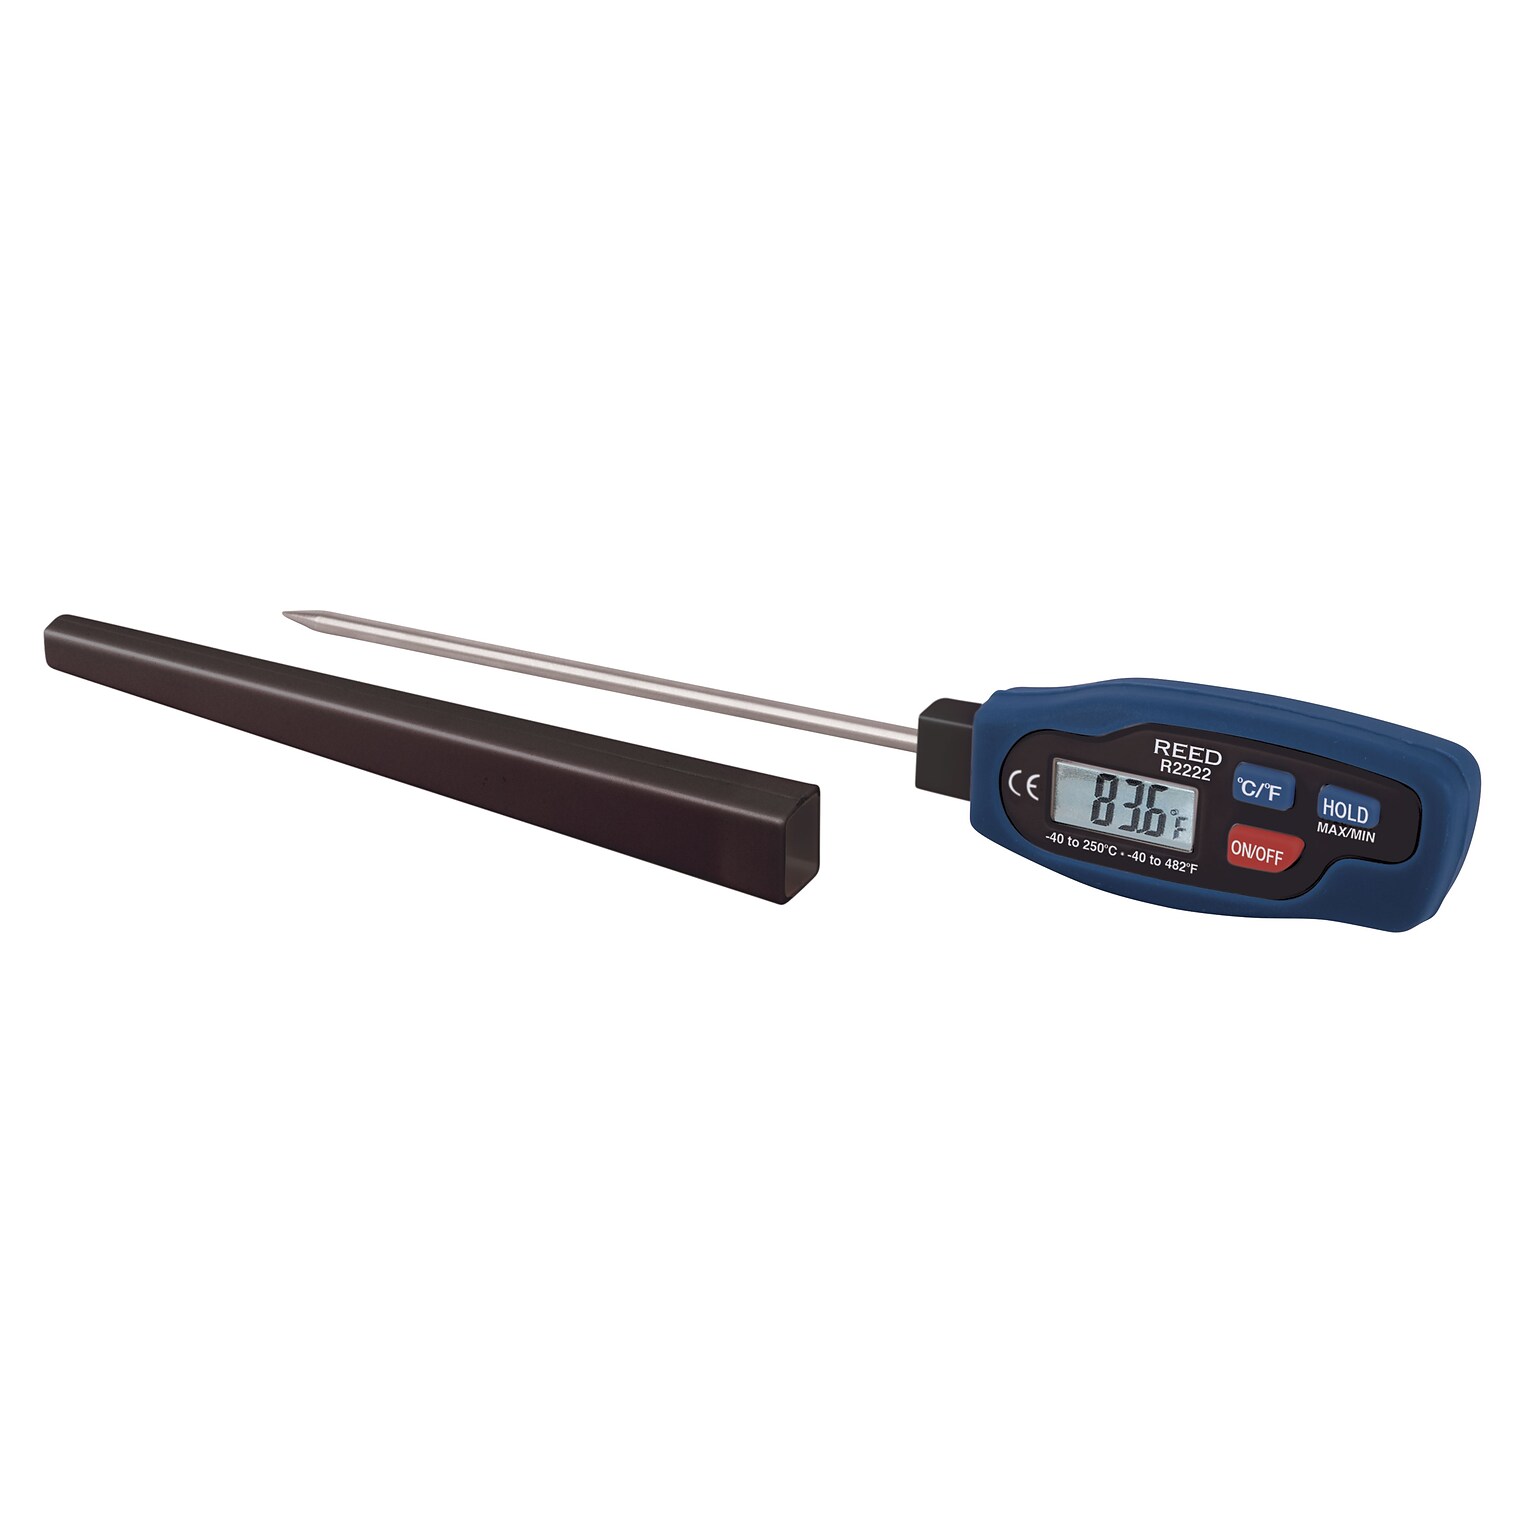 REED Instruments Digital Stem Thermometer, -40 to 482degree f/-40 to 250degree C (R2222)